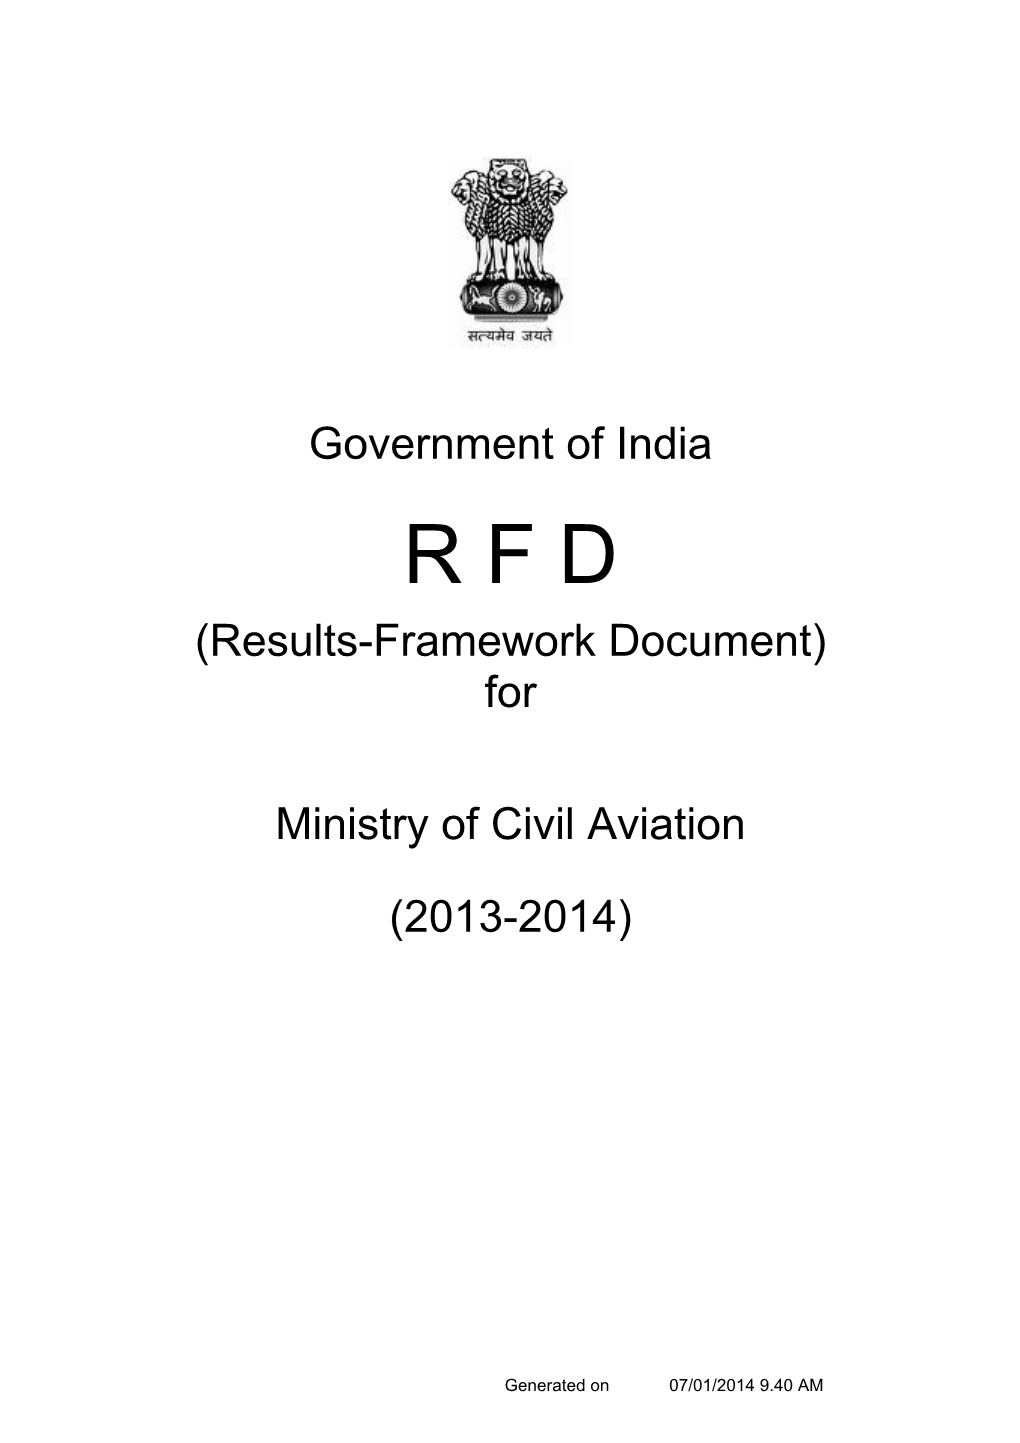 For Ministry of Civil Aviation-(2013-2014)